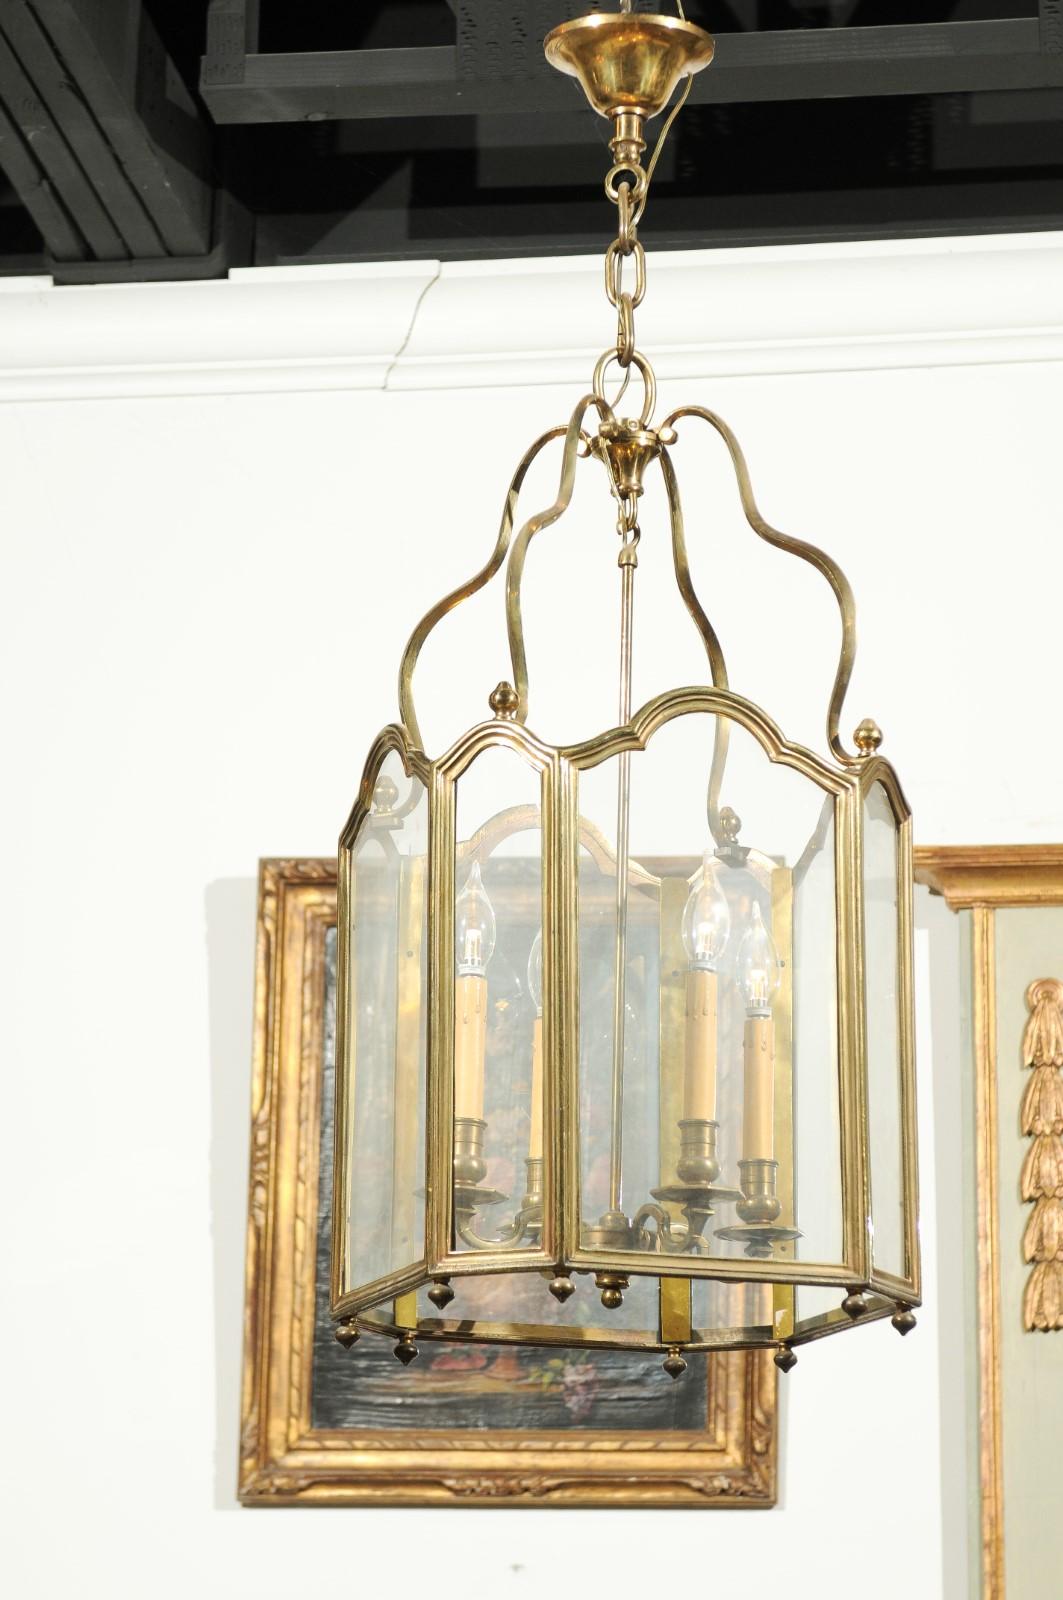 A French four-light brass lantern from the 19th century with glass panels and scrolling armature. Born in France during the 19th century, this elegant lantern features a brass armature, with scrolling motifs and molded panels accented with